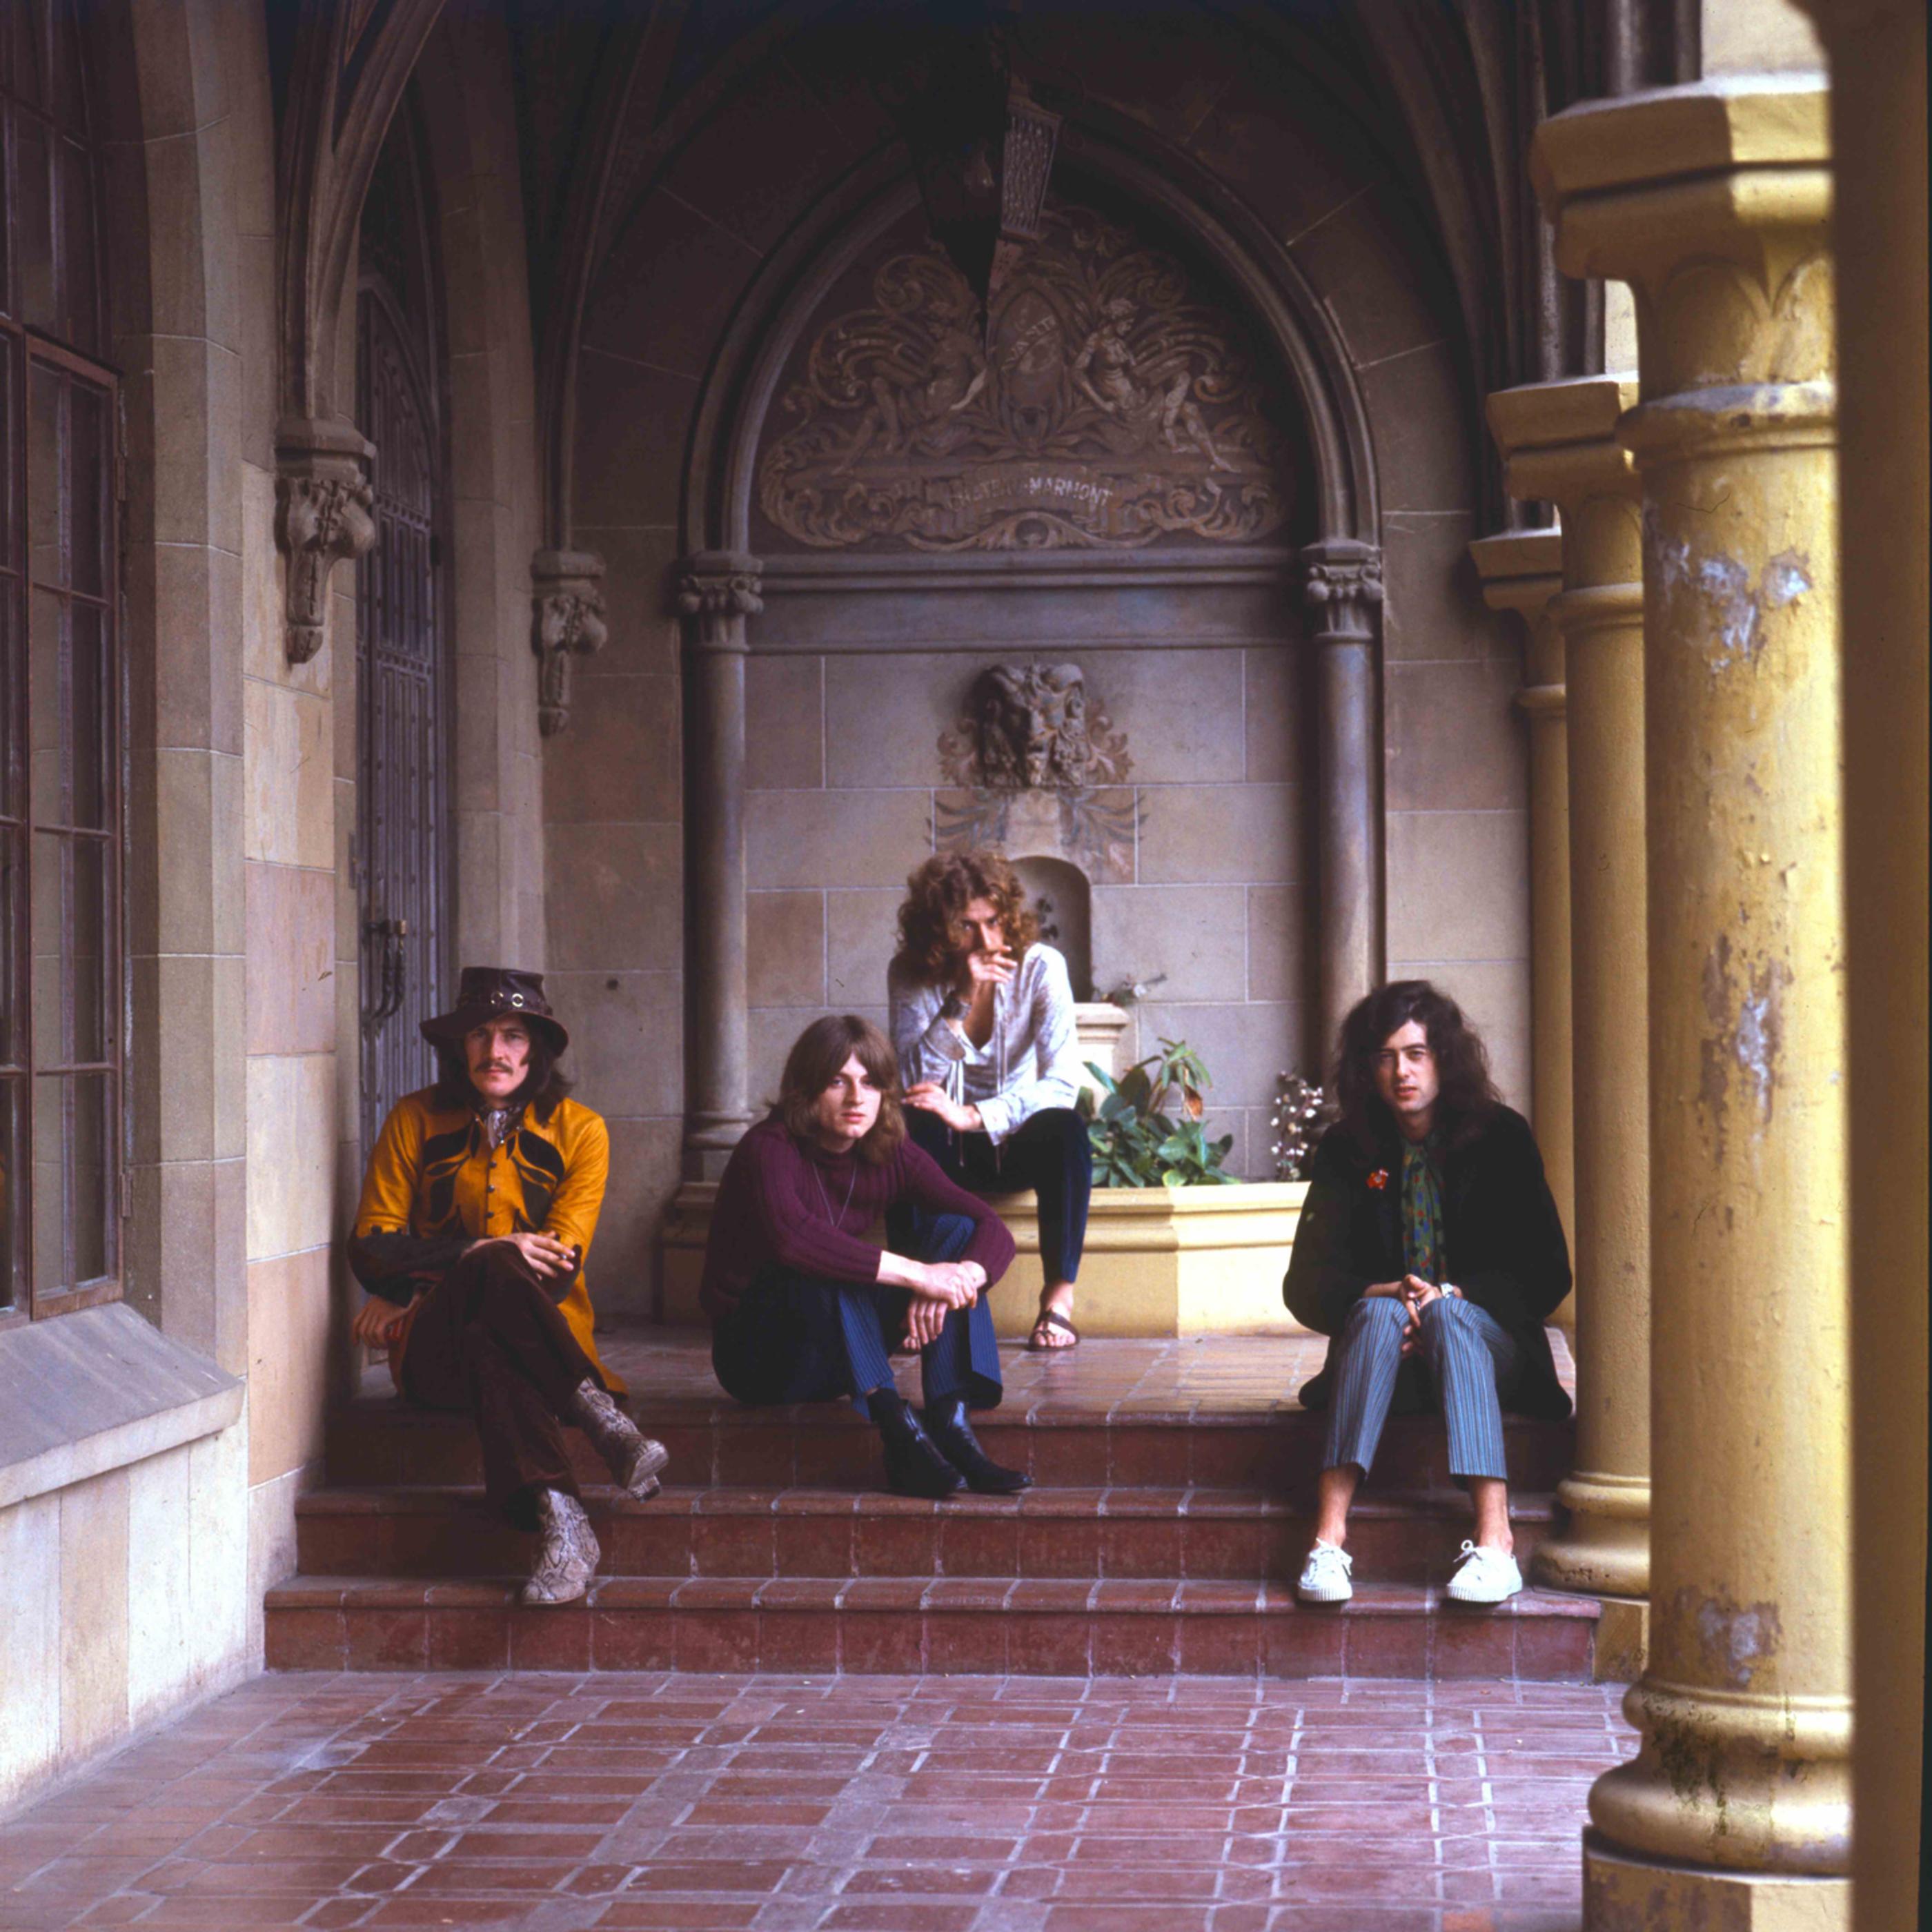 Led Zeppelin: Atmosphere at the Chateau Marmont 40" x 40" (Edition of 12)